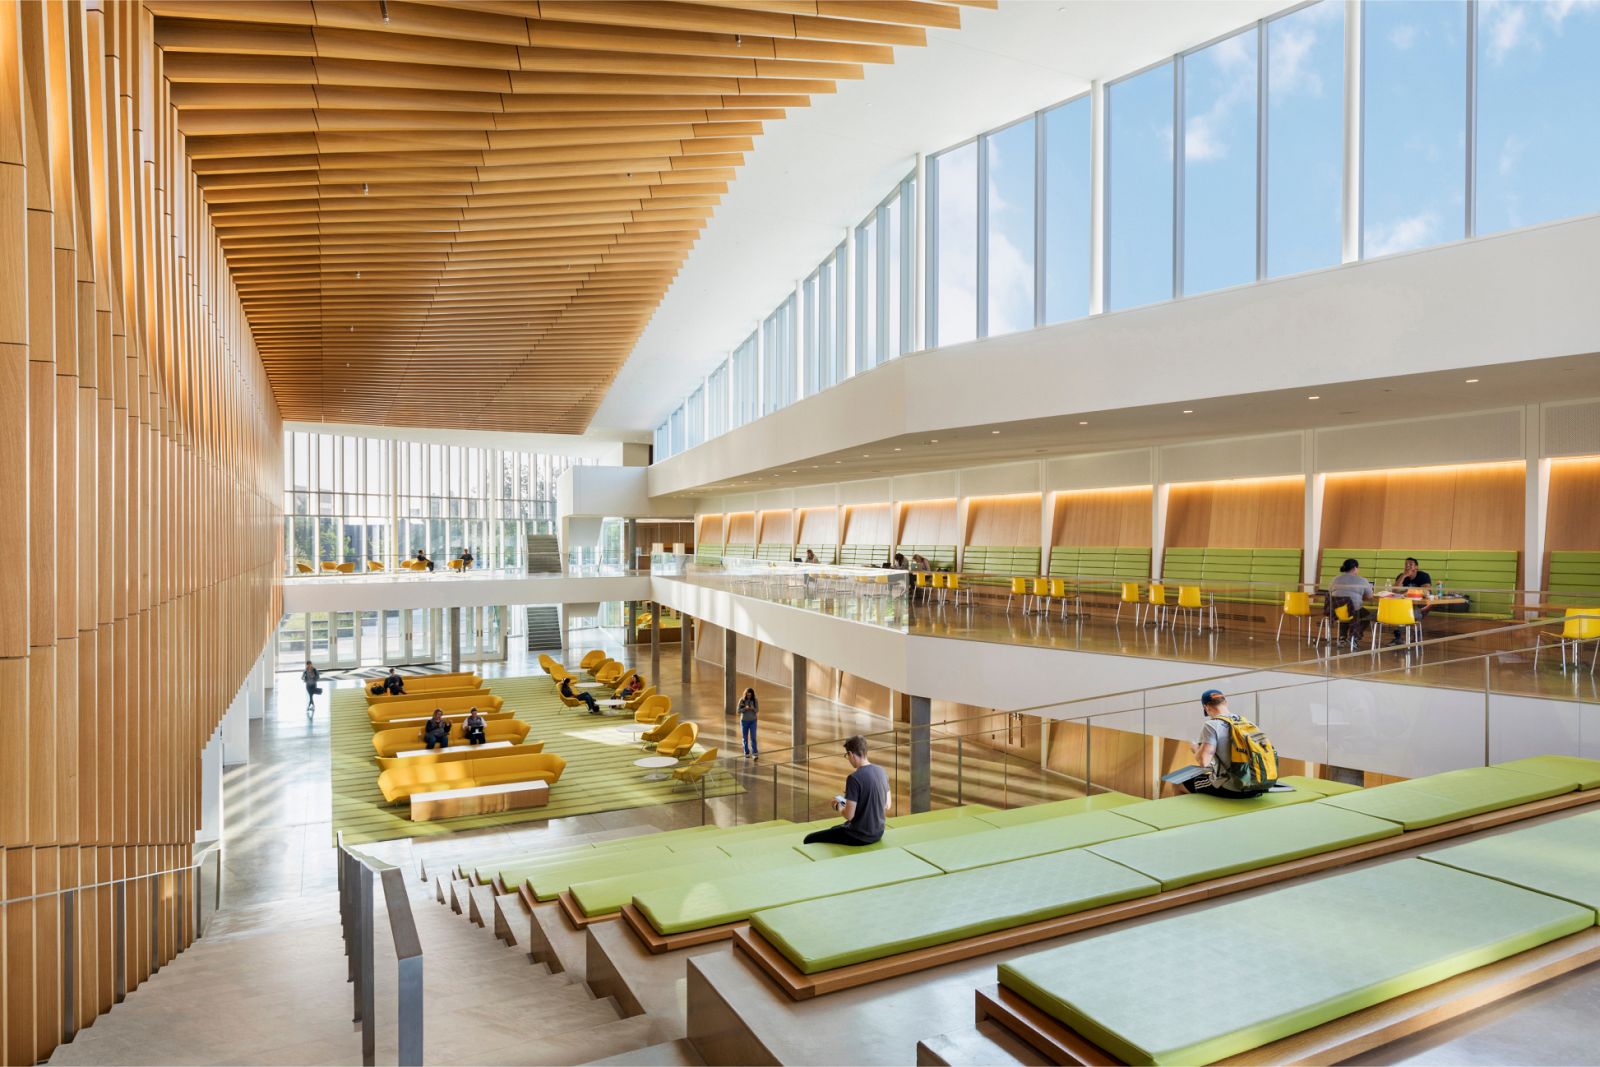 Cornell University College of Veterinary Medicine - Projects -  Weiss/Manfredi